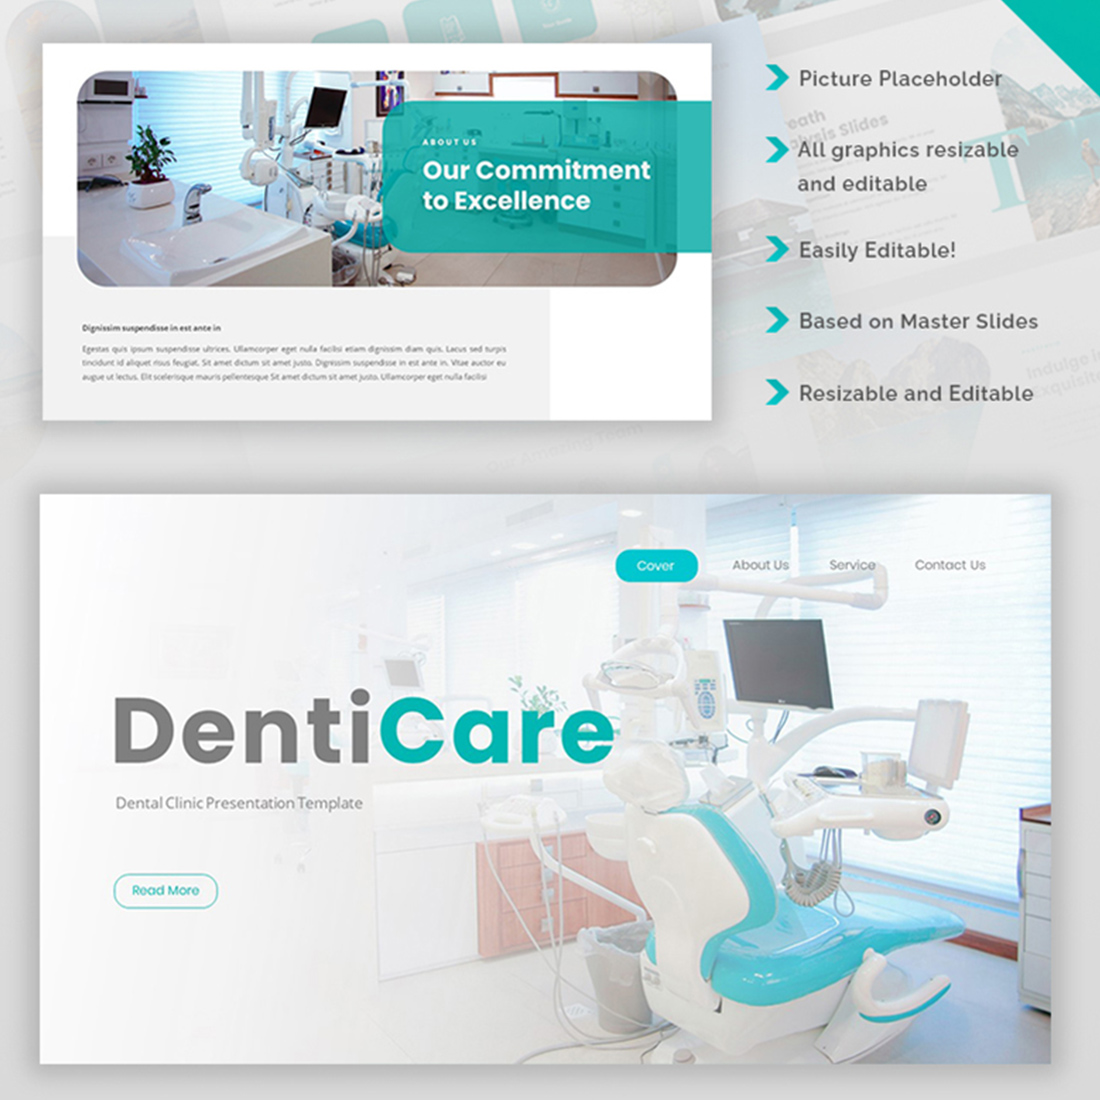 DentiCare-Dental Clinic PowerPoint Template preview image.